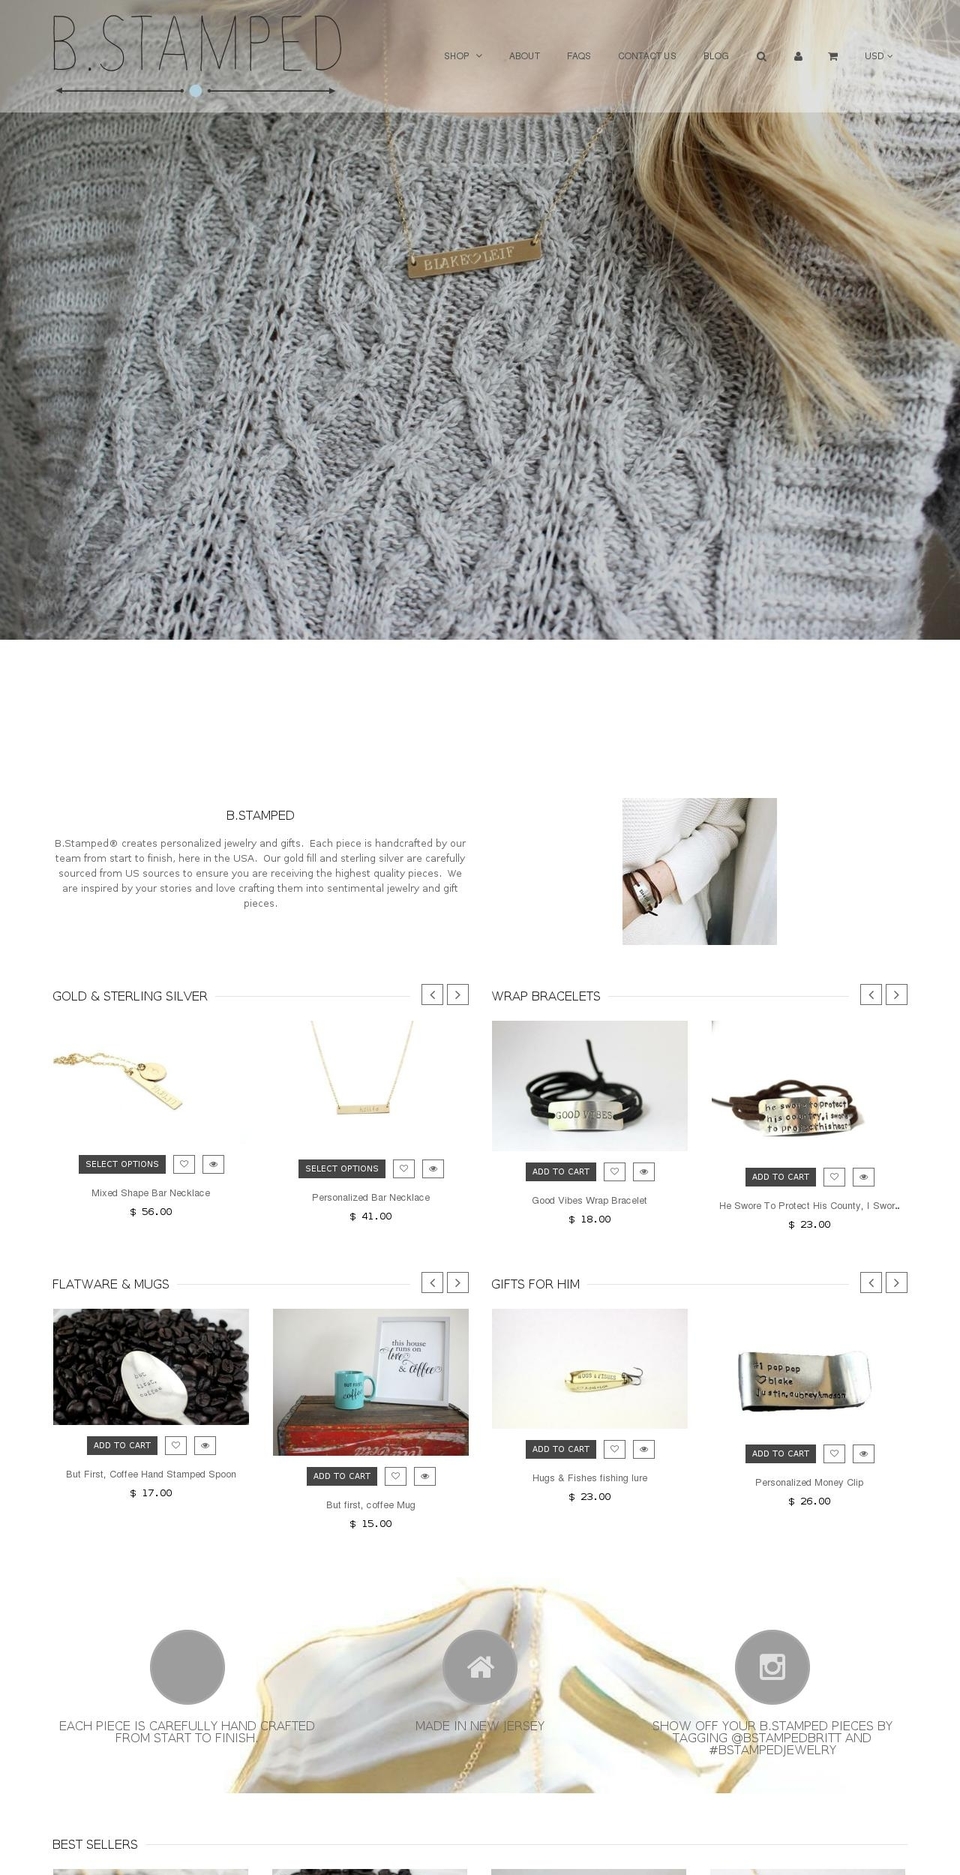 QUEEN Shopify theme site example bstamped.com